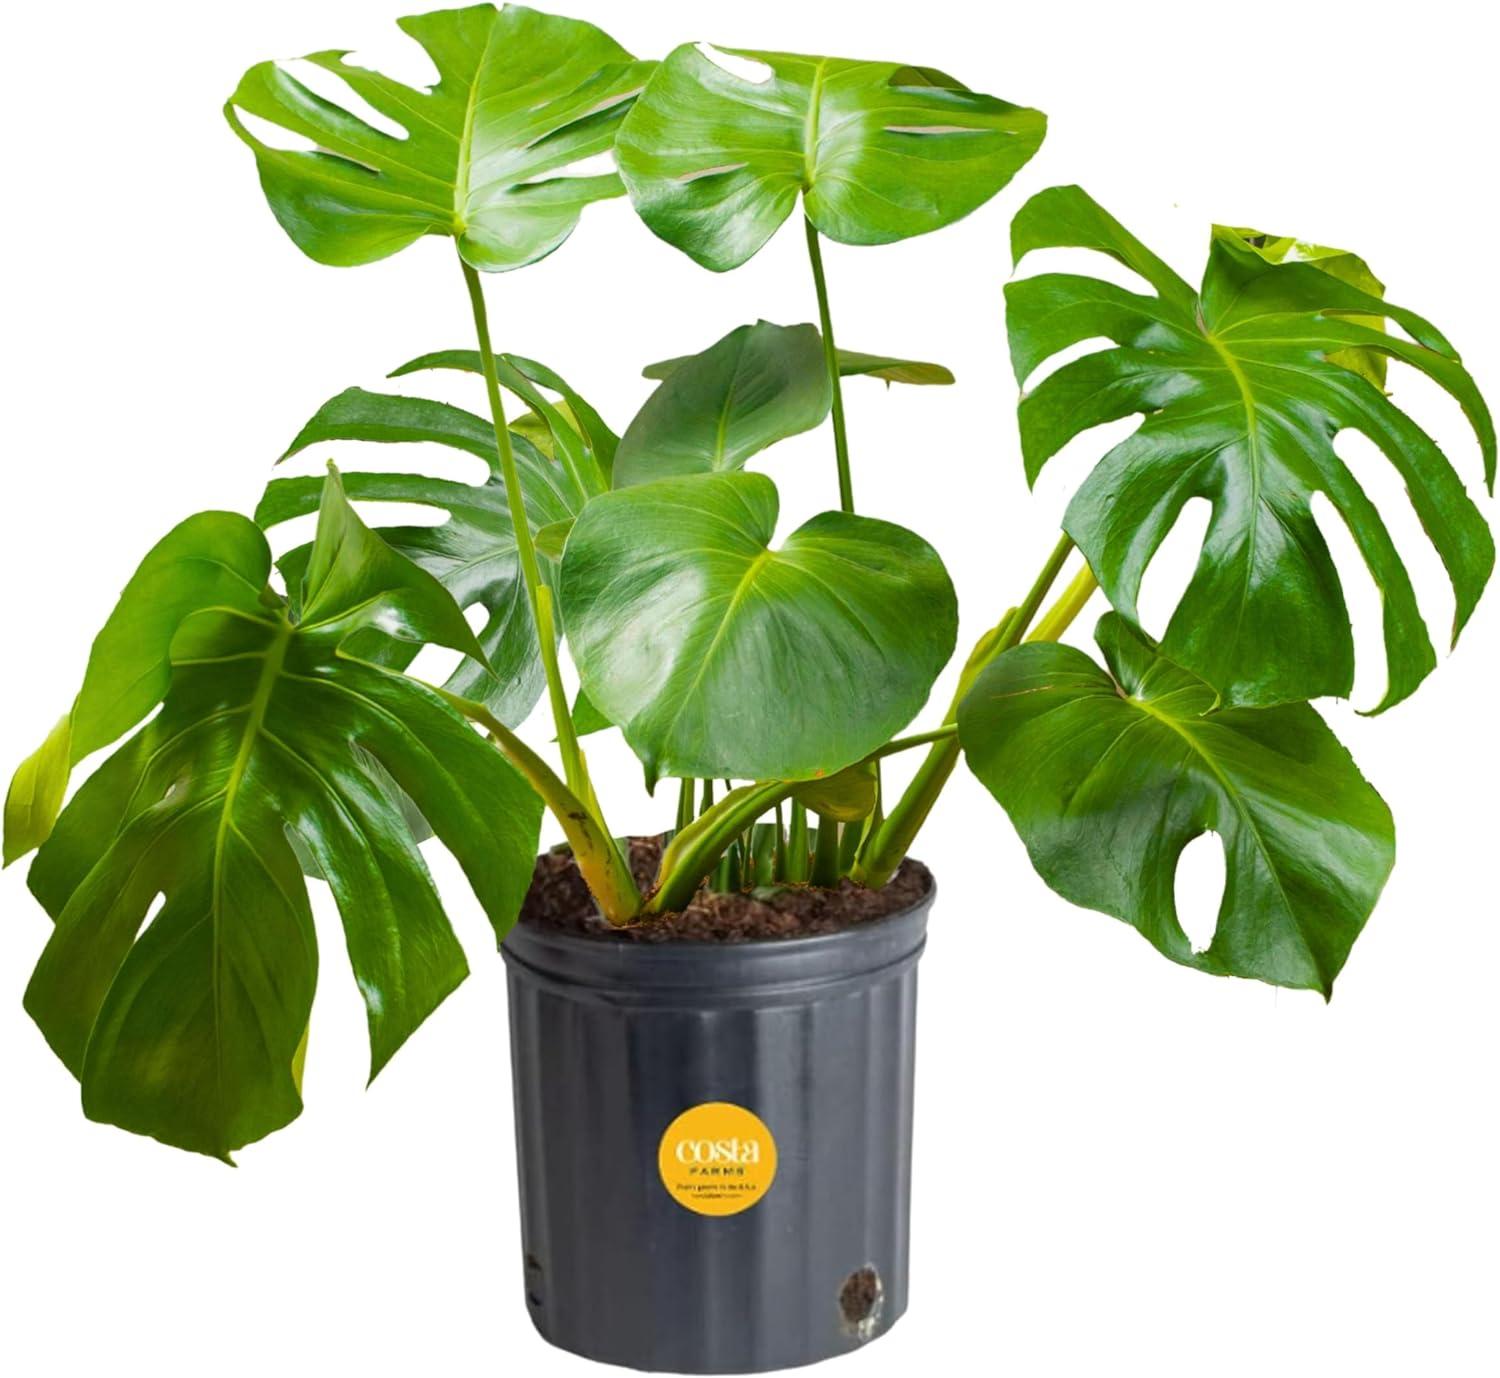 Costa Farms Live Monstera Indoor Plant in Nursery Plant Pot for $20.99